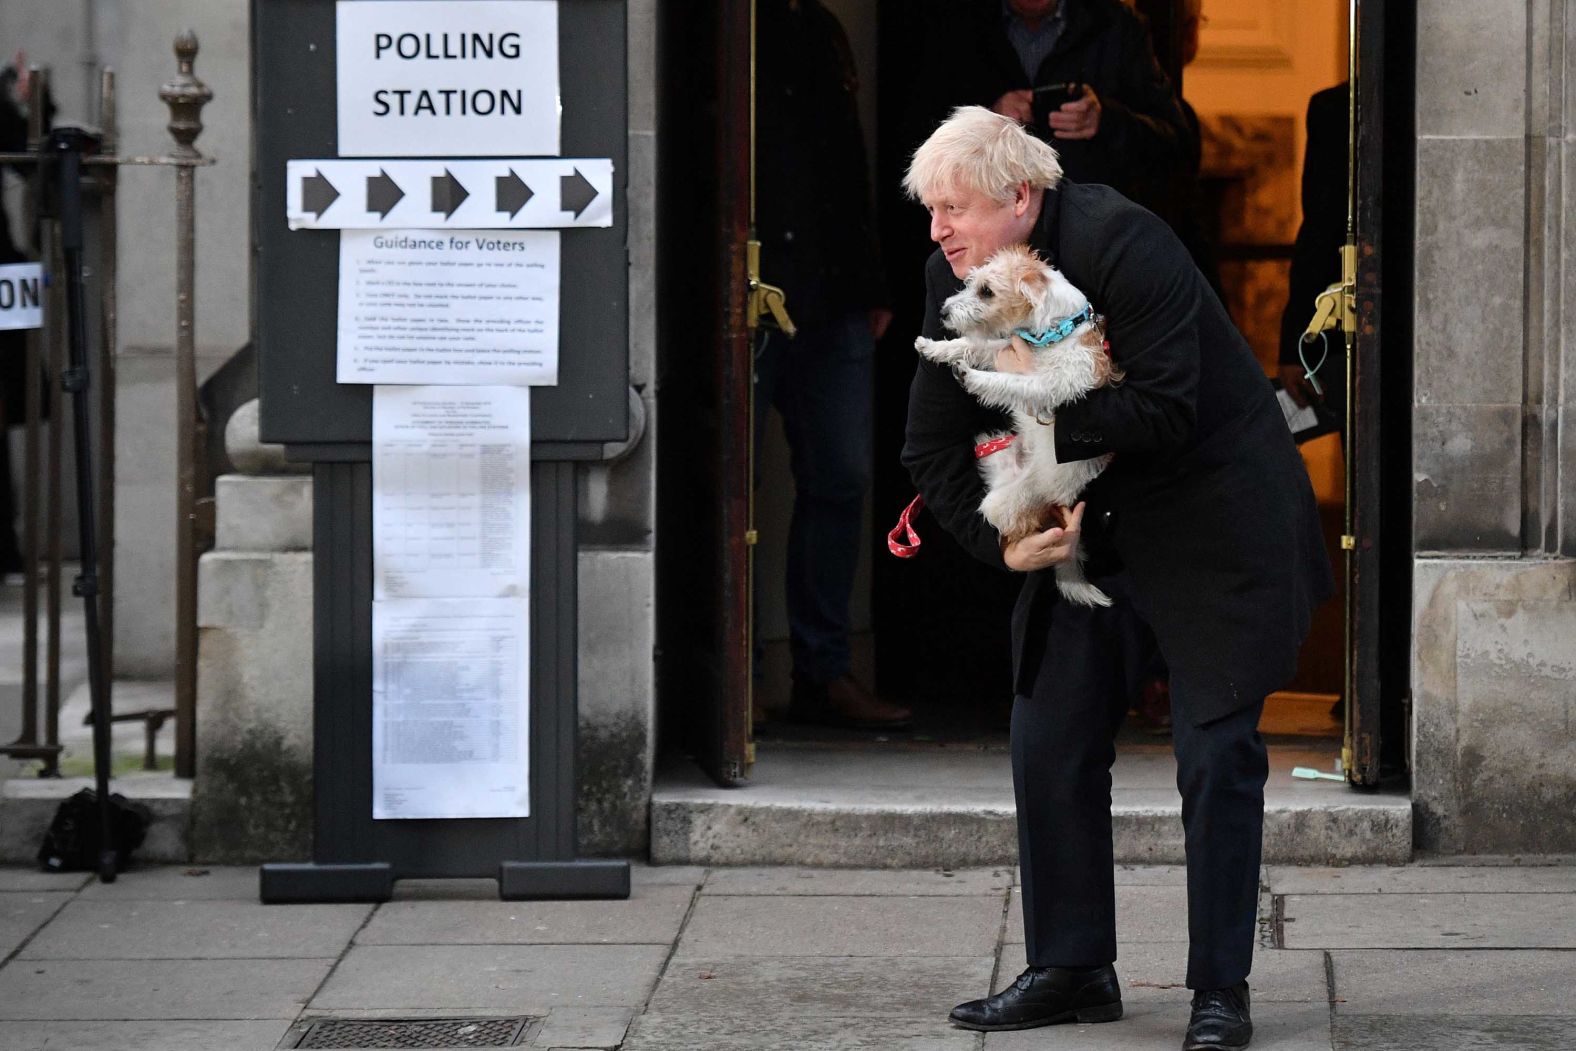 Johnson poses with his dog Dilyn as he leaves a polling station in London in December 2019.